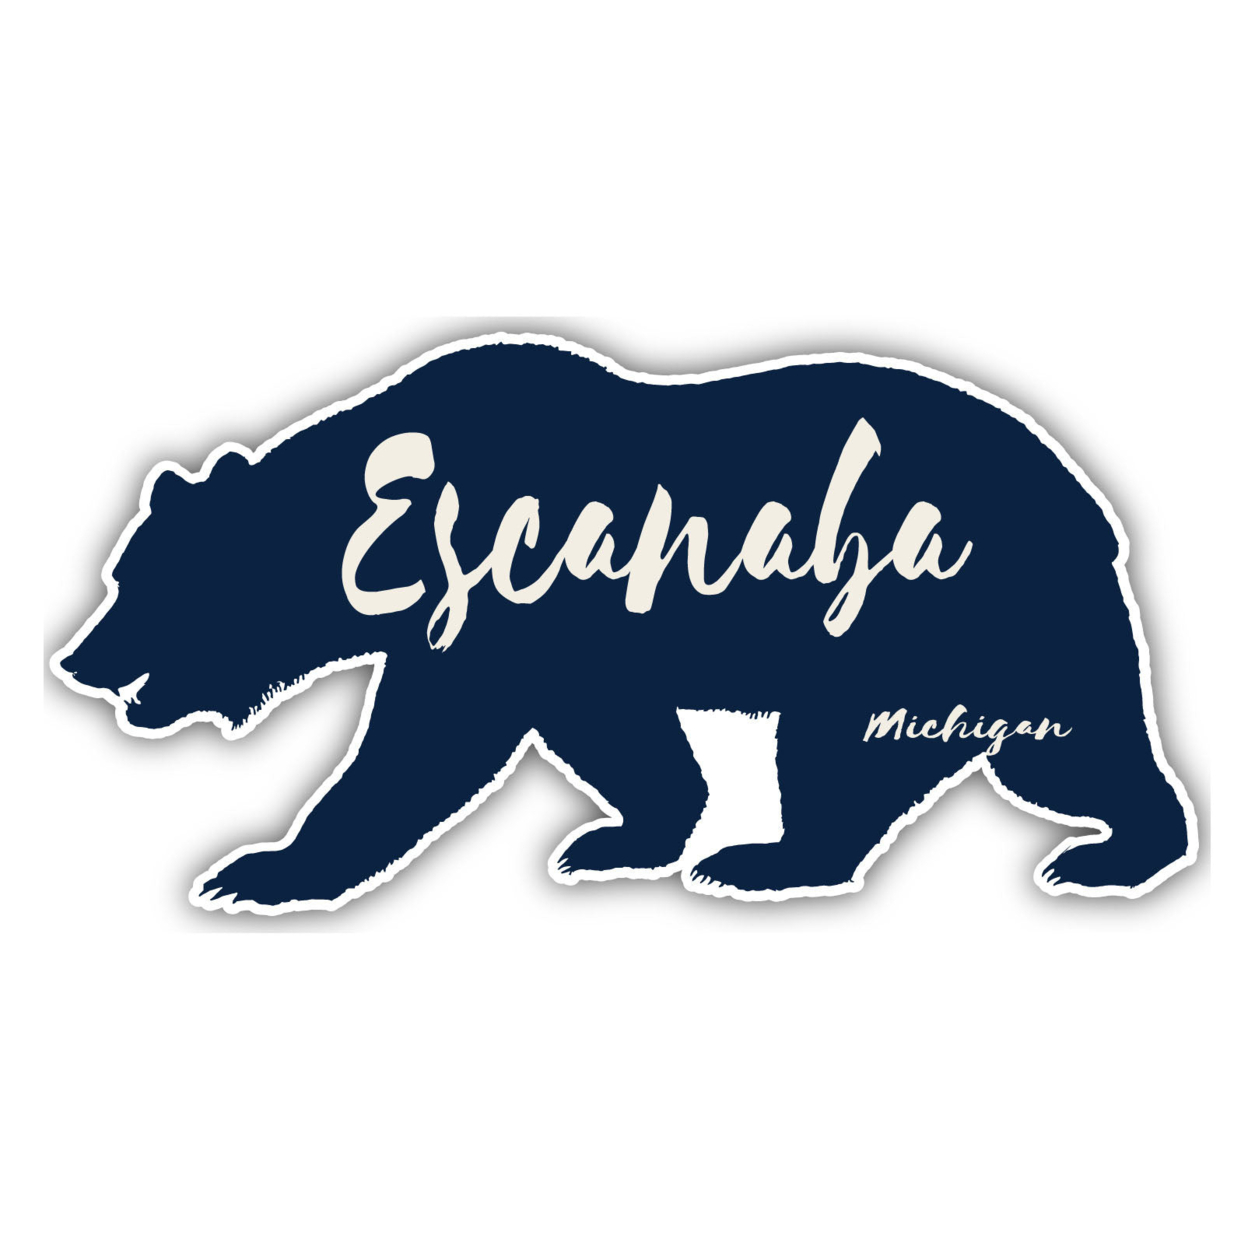 Escanaba Michigan Souvenir Decorative Stickers (Choose Theme And Size) - 4-Pack, 2-Inch, Bear